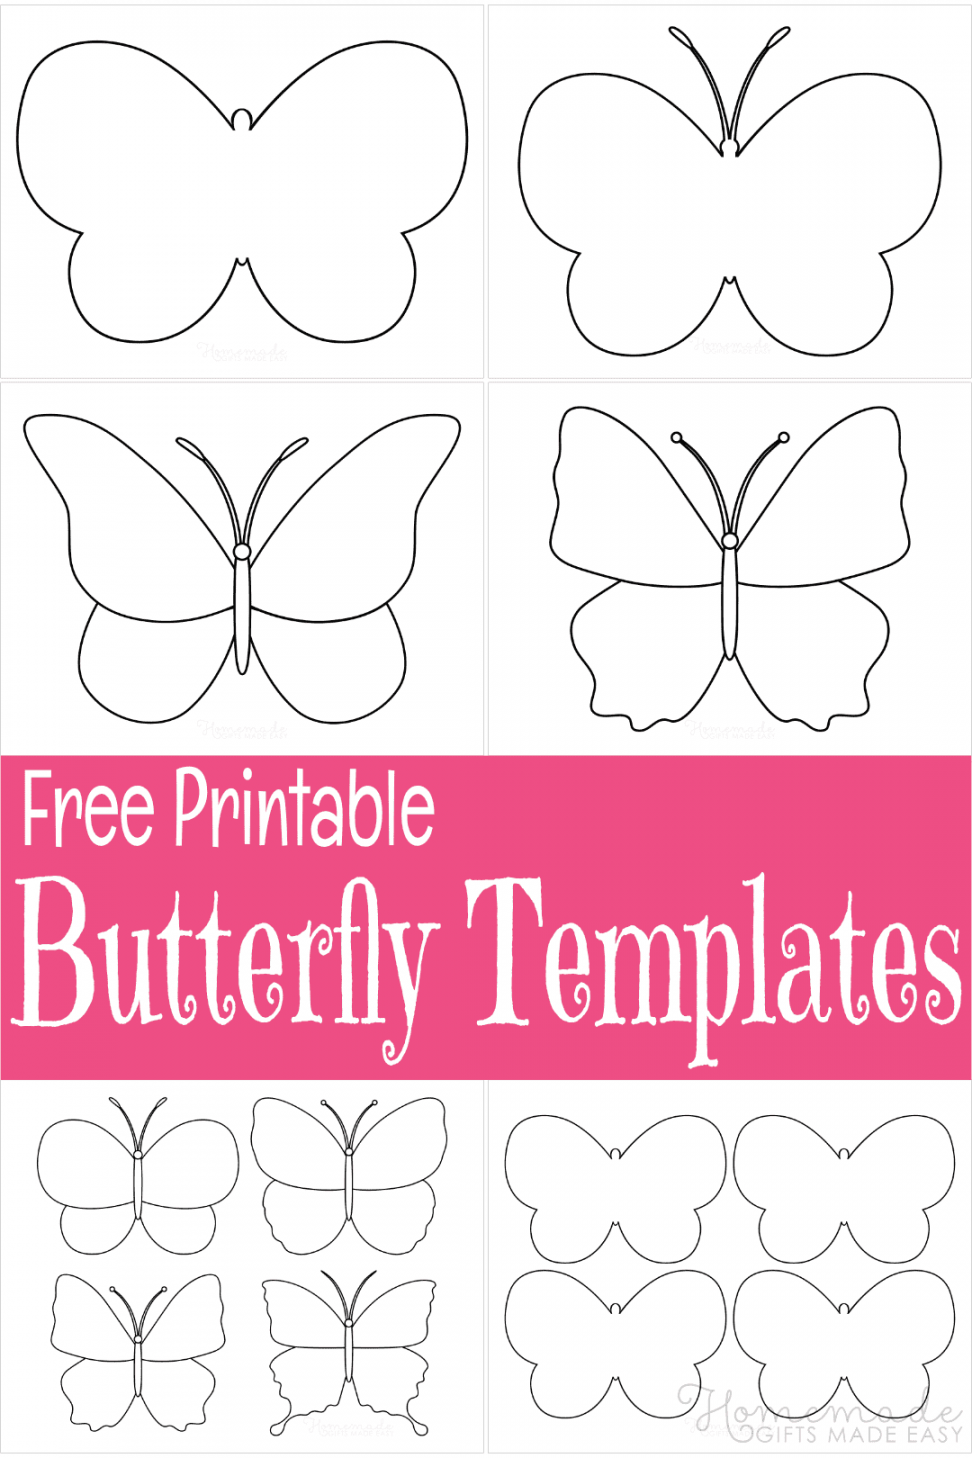 Free Printable Butterfly Templates - FREE Printables - Free Printable 3d Butterfly Template